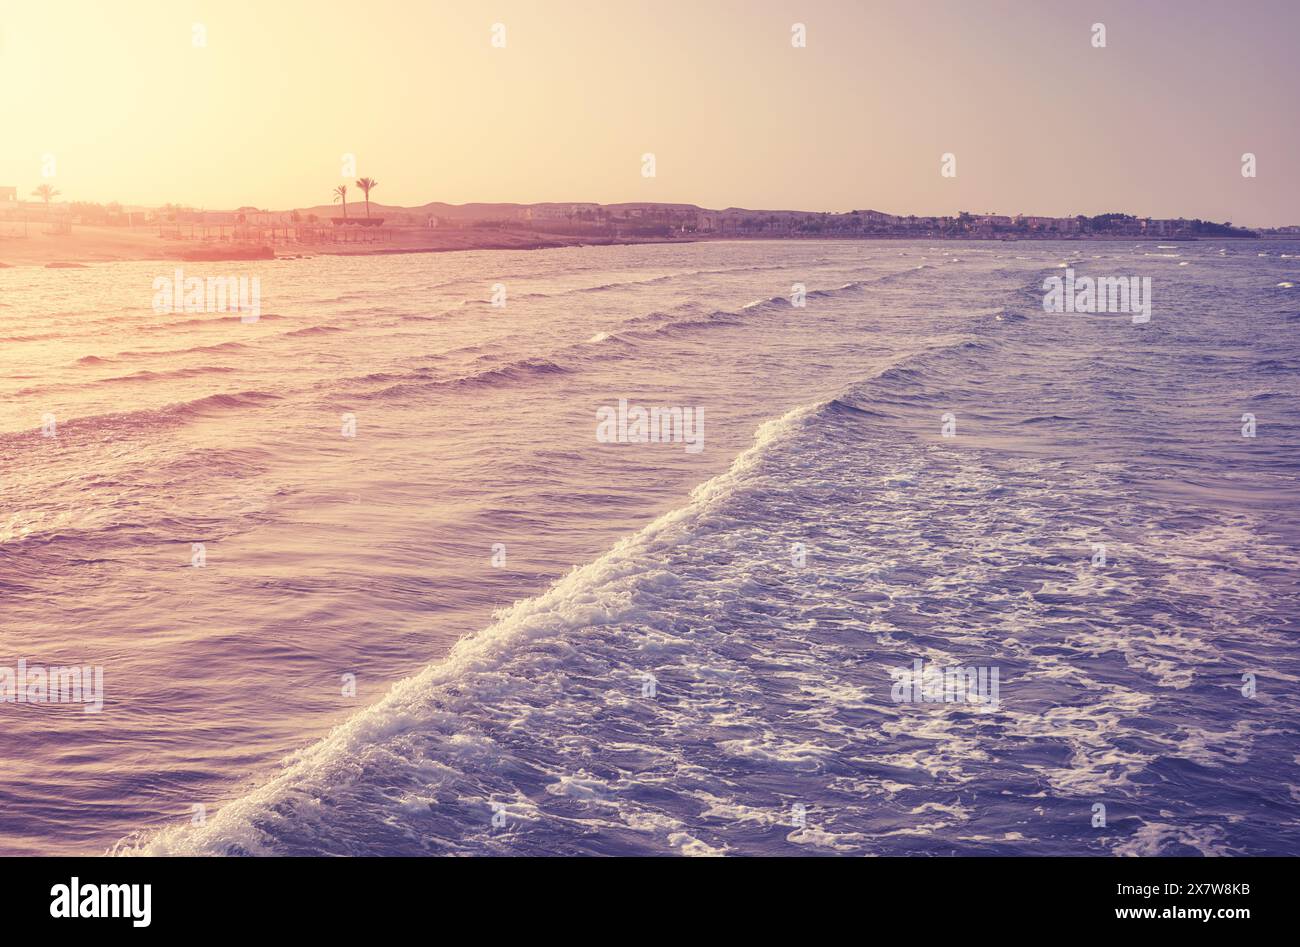 Seascape seen from above the water at sunset, retro color toning applied, Egypt. Stock Photo